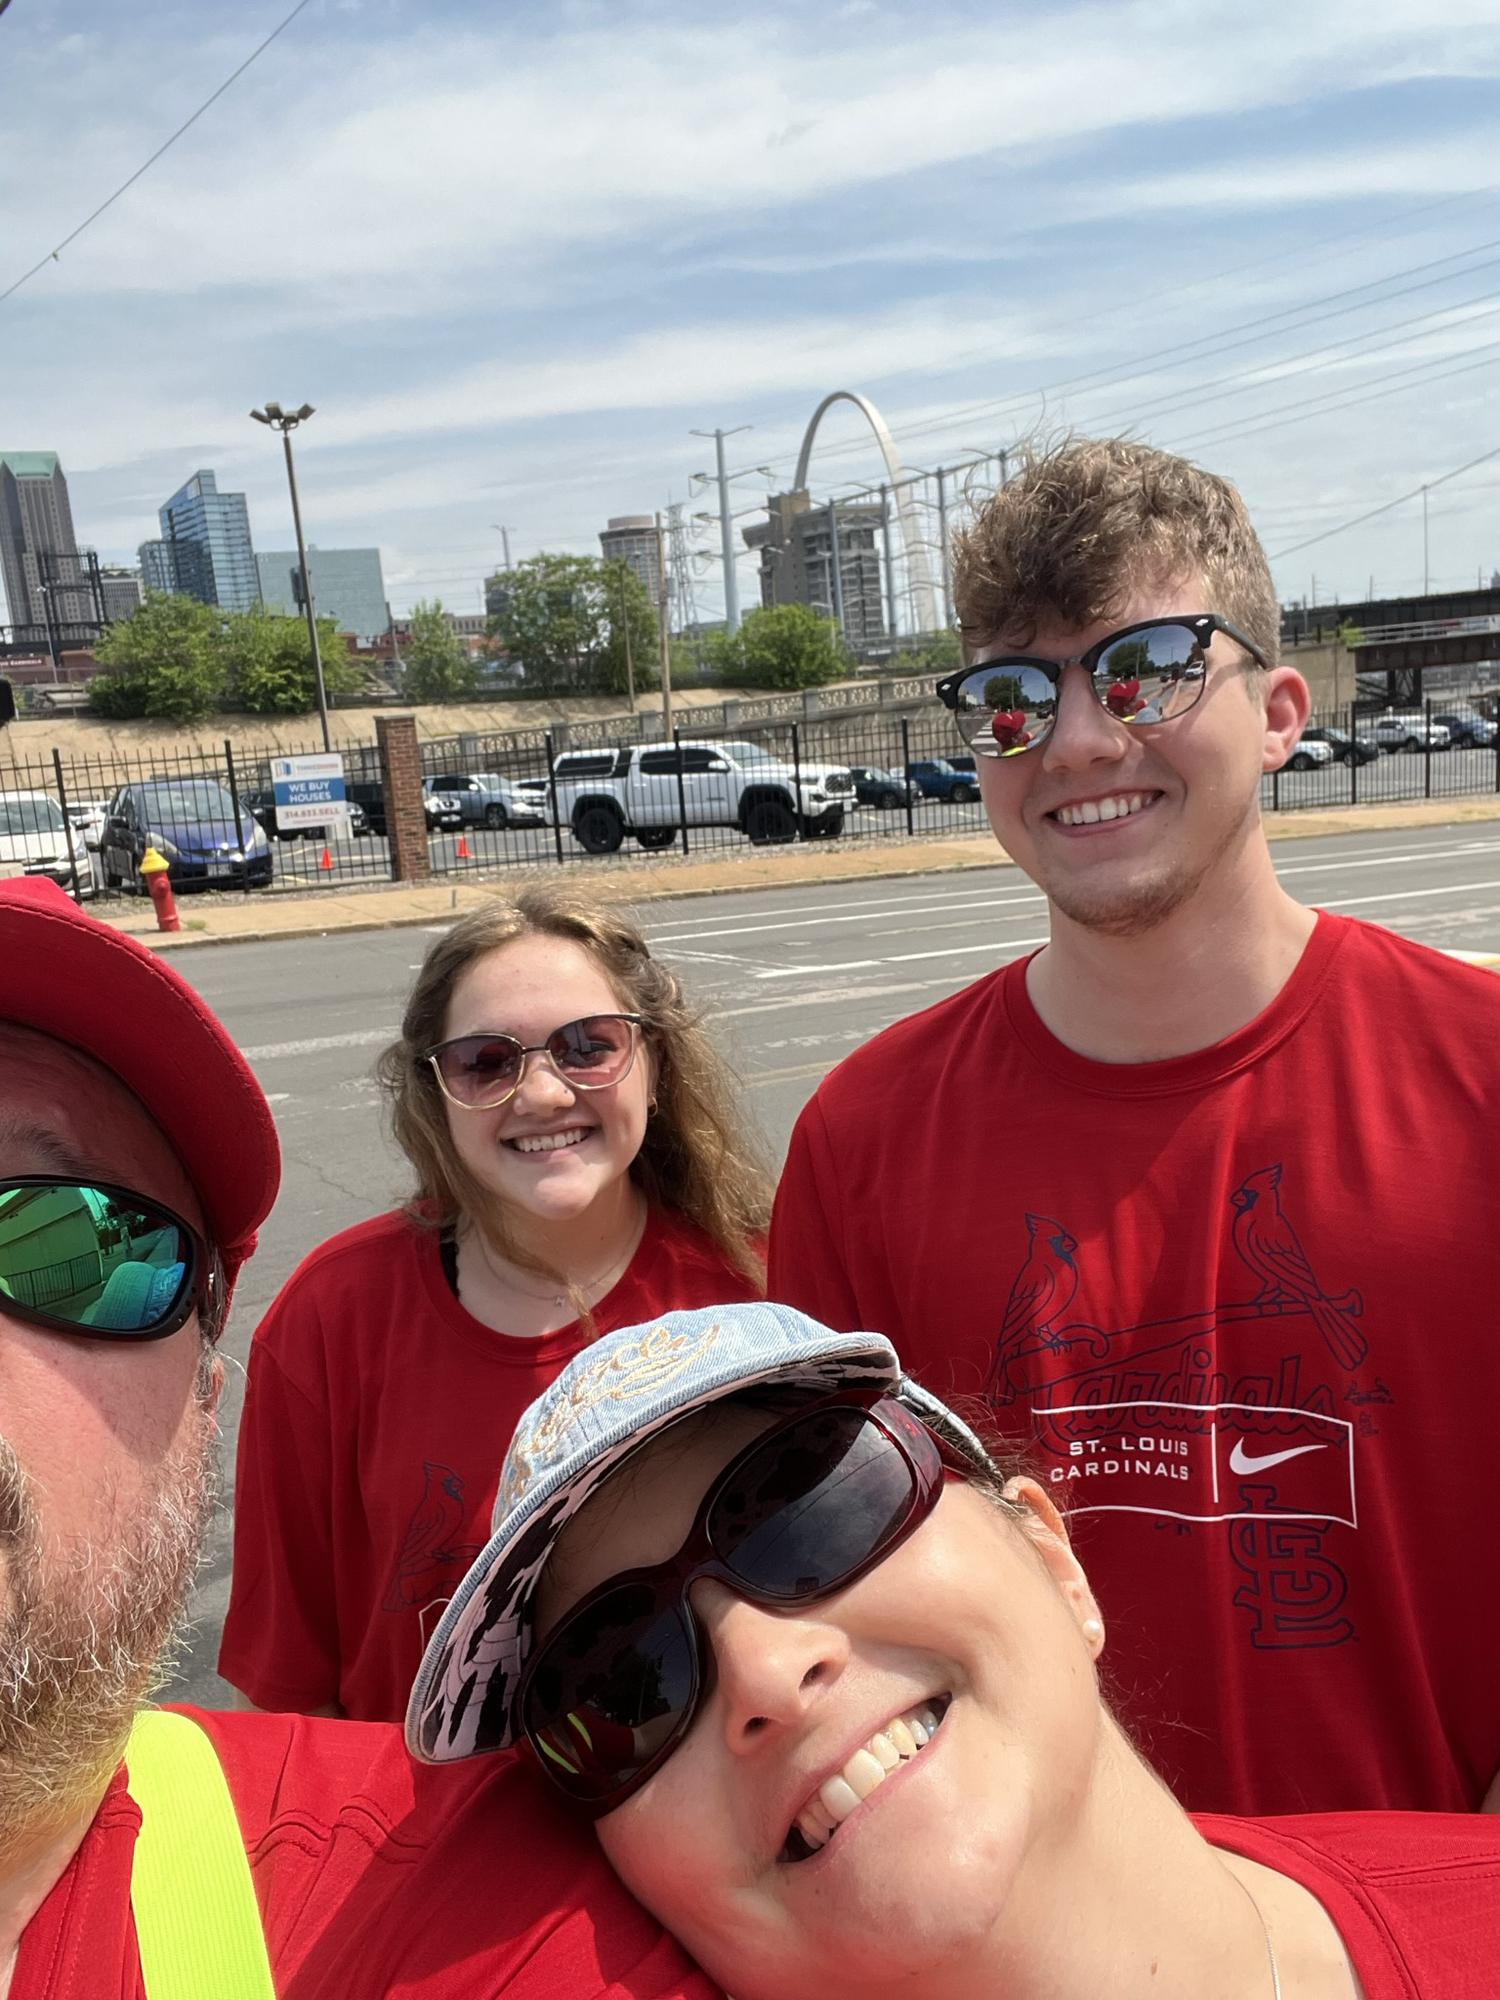 May 14th 2022
St. Louis cardinals game with Melanie’s parents